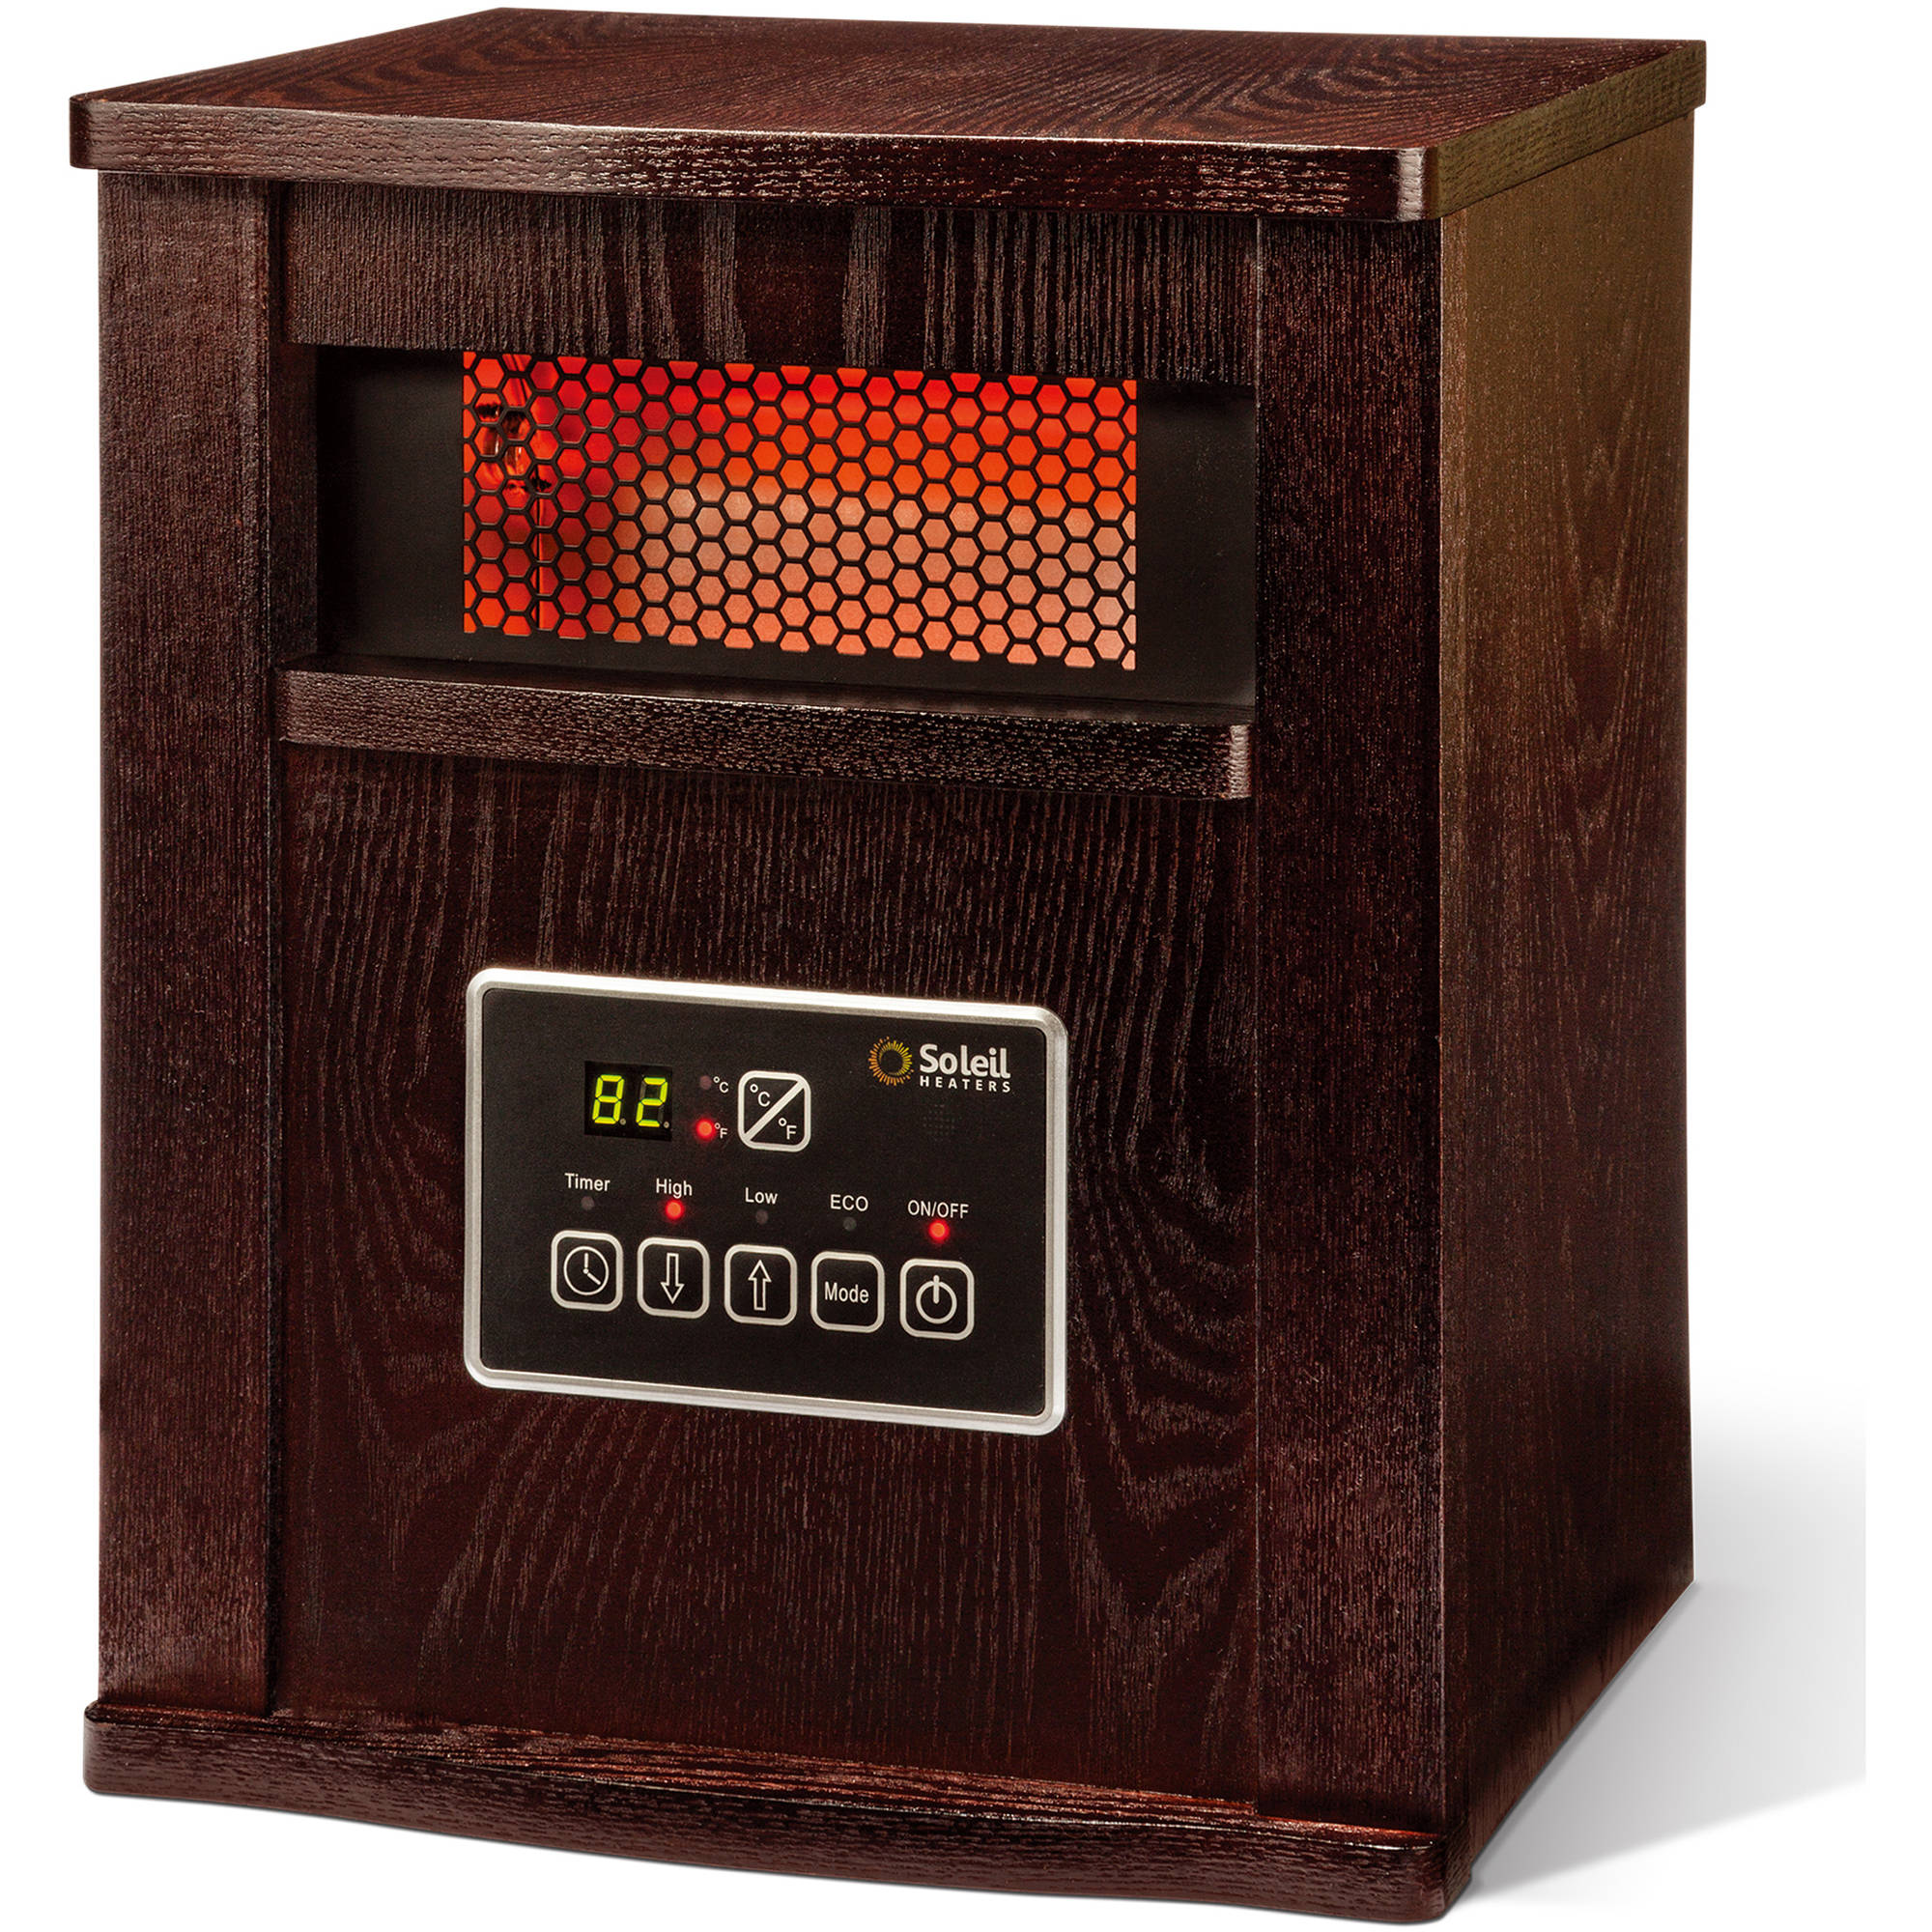 Soleil Electric Infrared Quartz Cabinet Heater with Remote 1500W Indoor Walnut - image 1 of 3